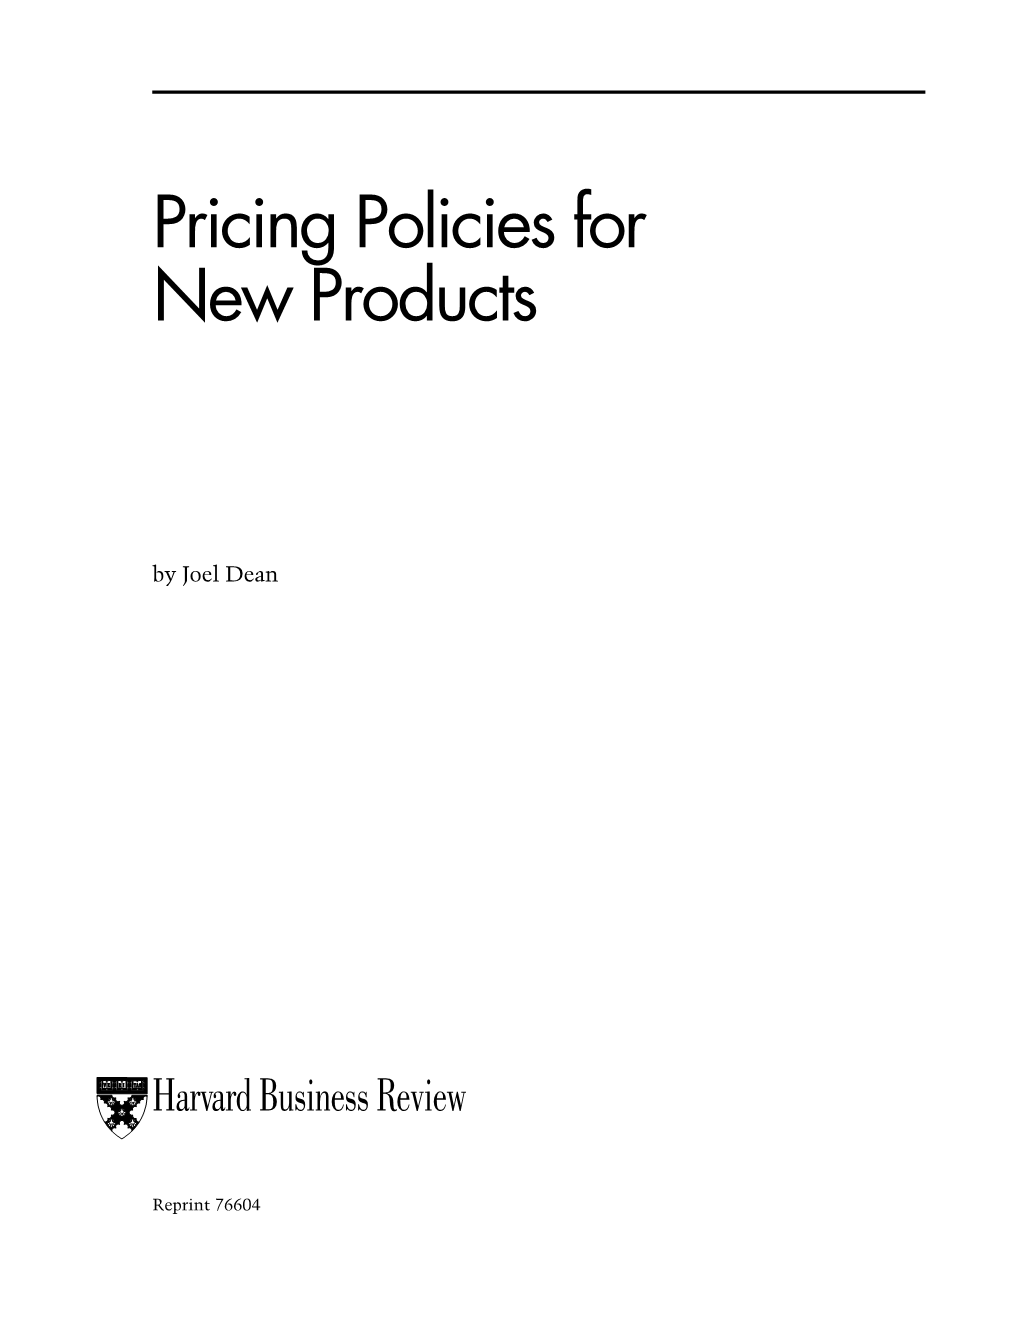 Pricing Policies for New Products